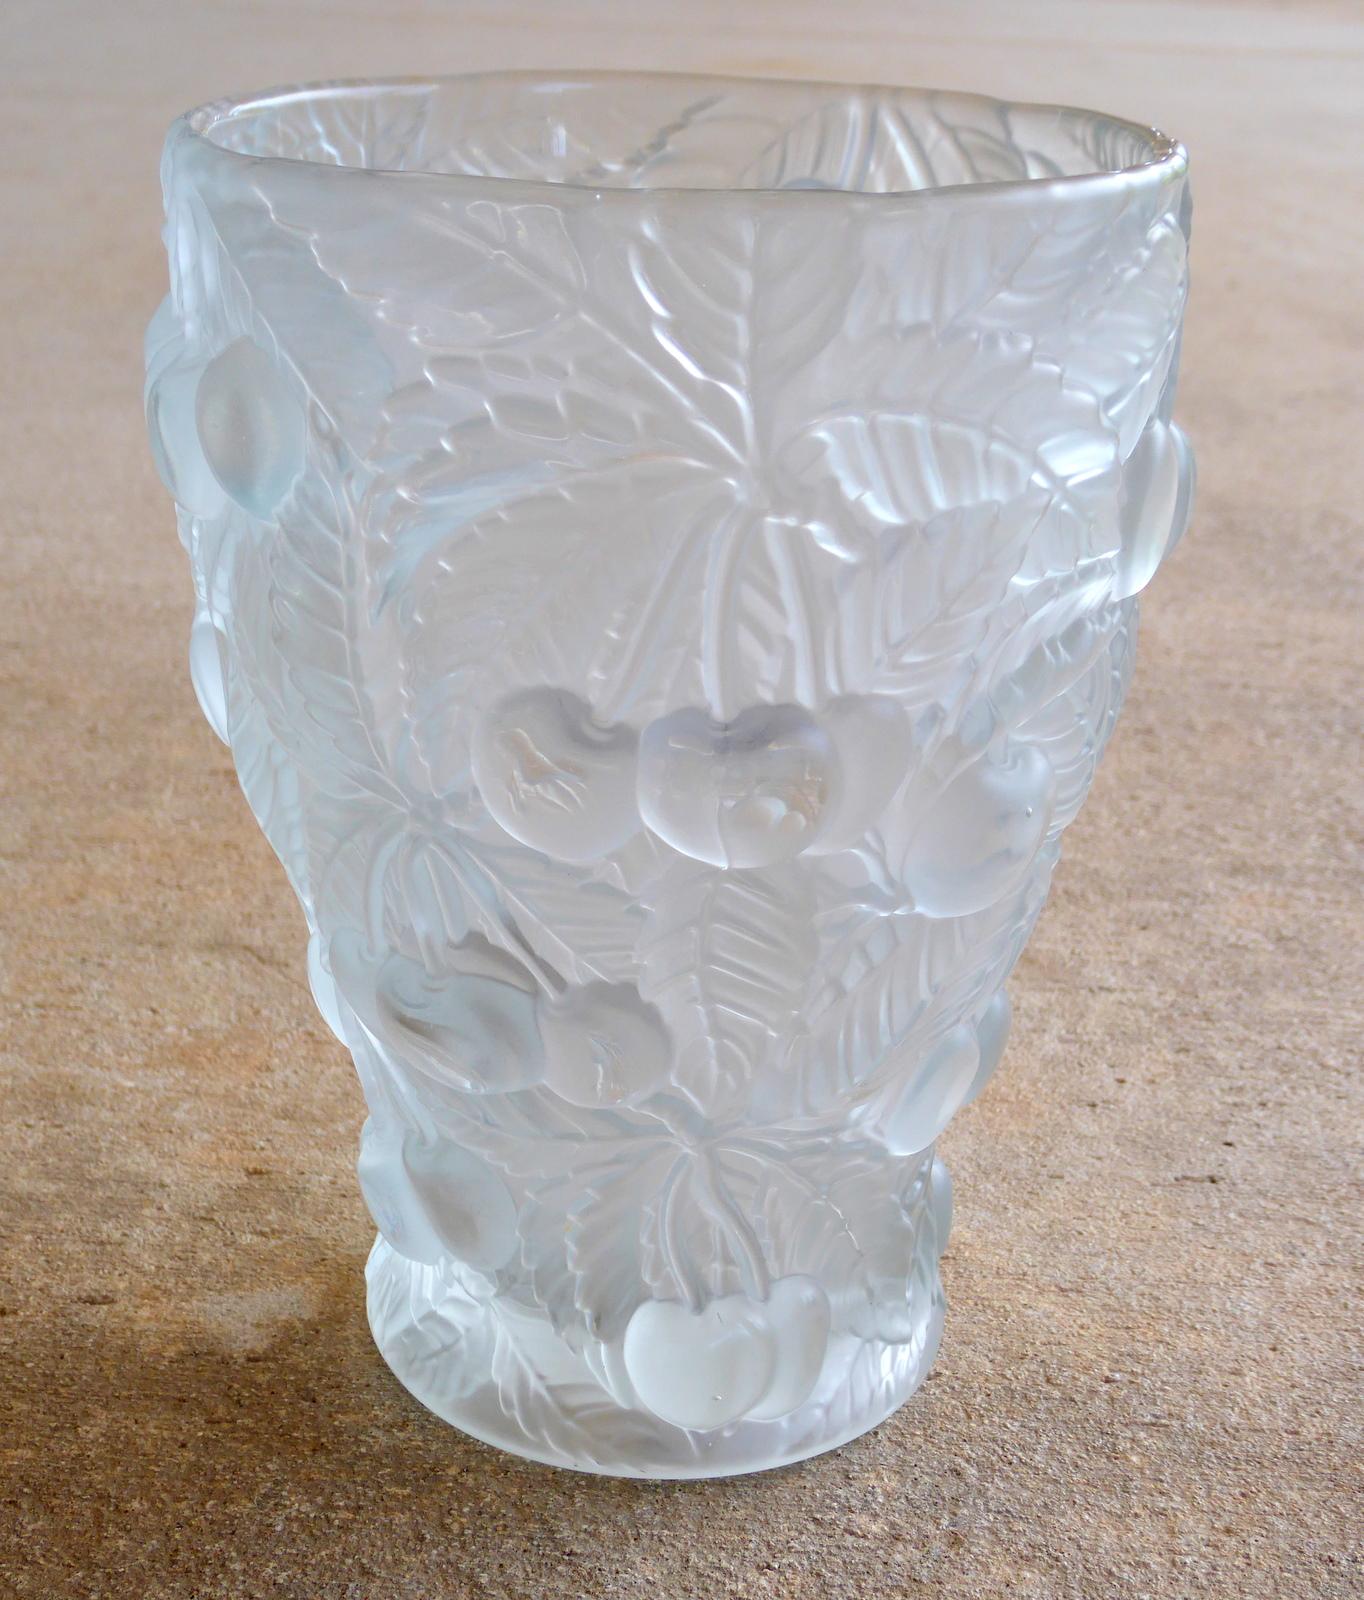 Easily mistaken for Lalique, this lovely 'Cherry' art glass vase in the Barolac line was designed circa 1935 by Czech artist Josef Inwald for John Jenkins & Son of London. It has marvelously high-relief cherry forms in etched and polished glass.

A